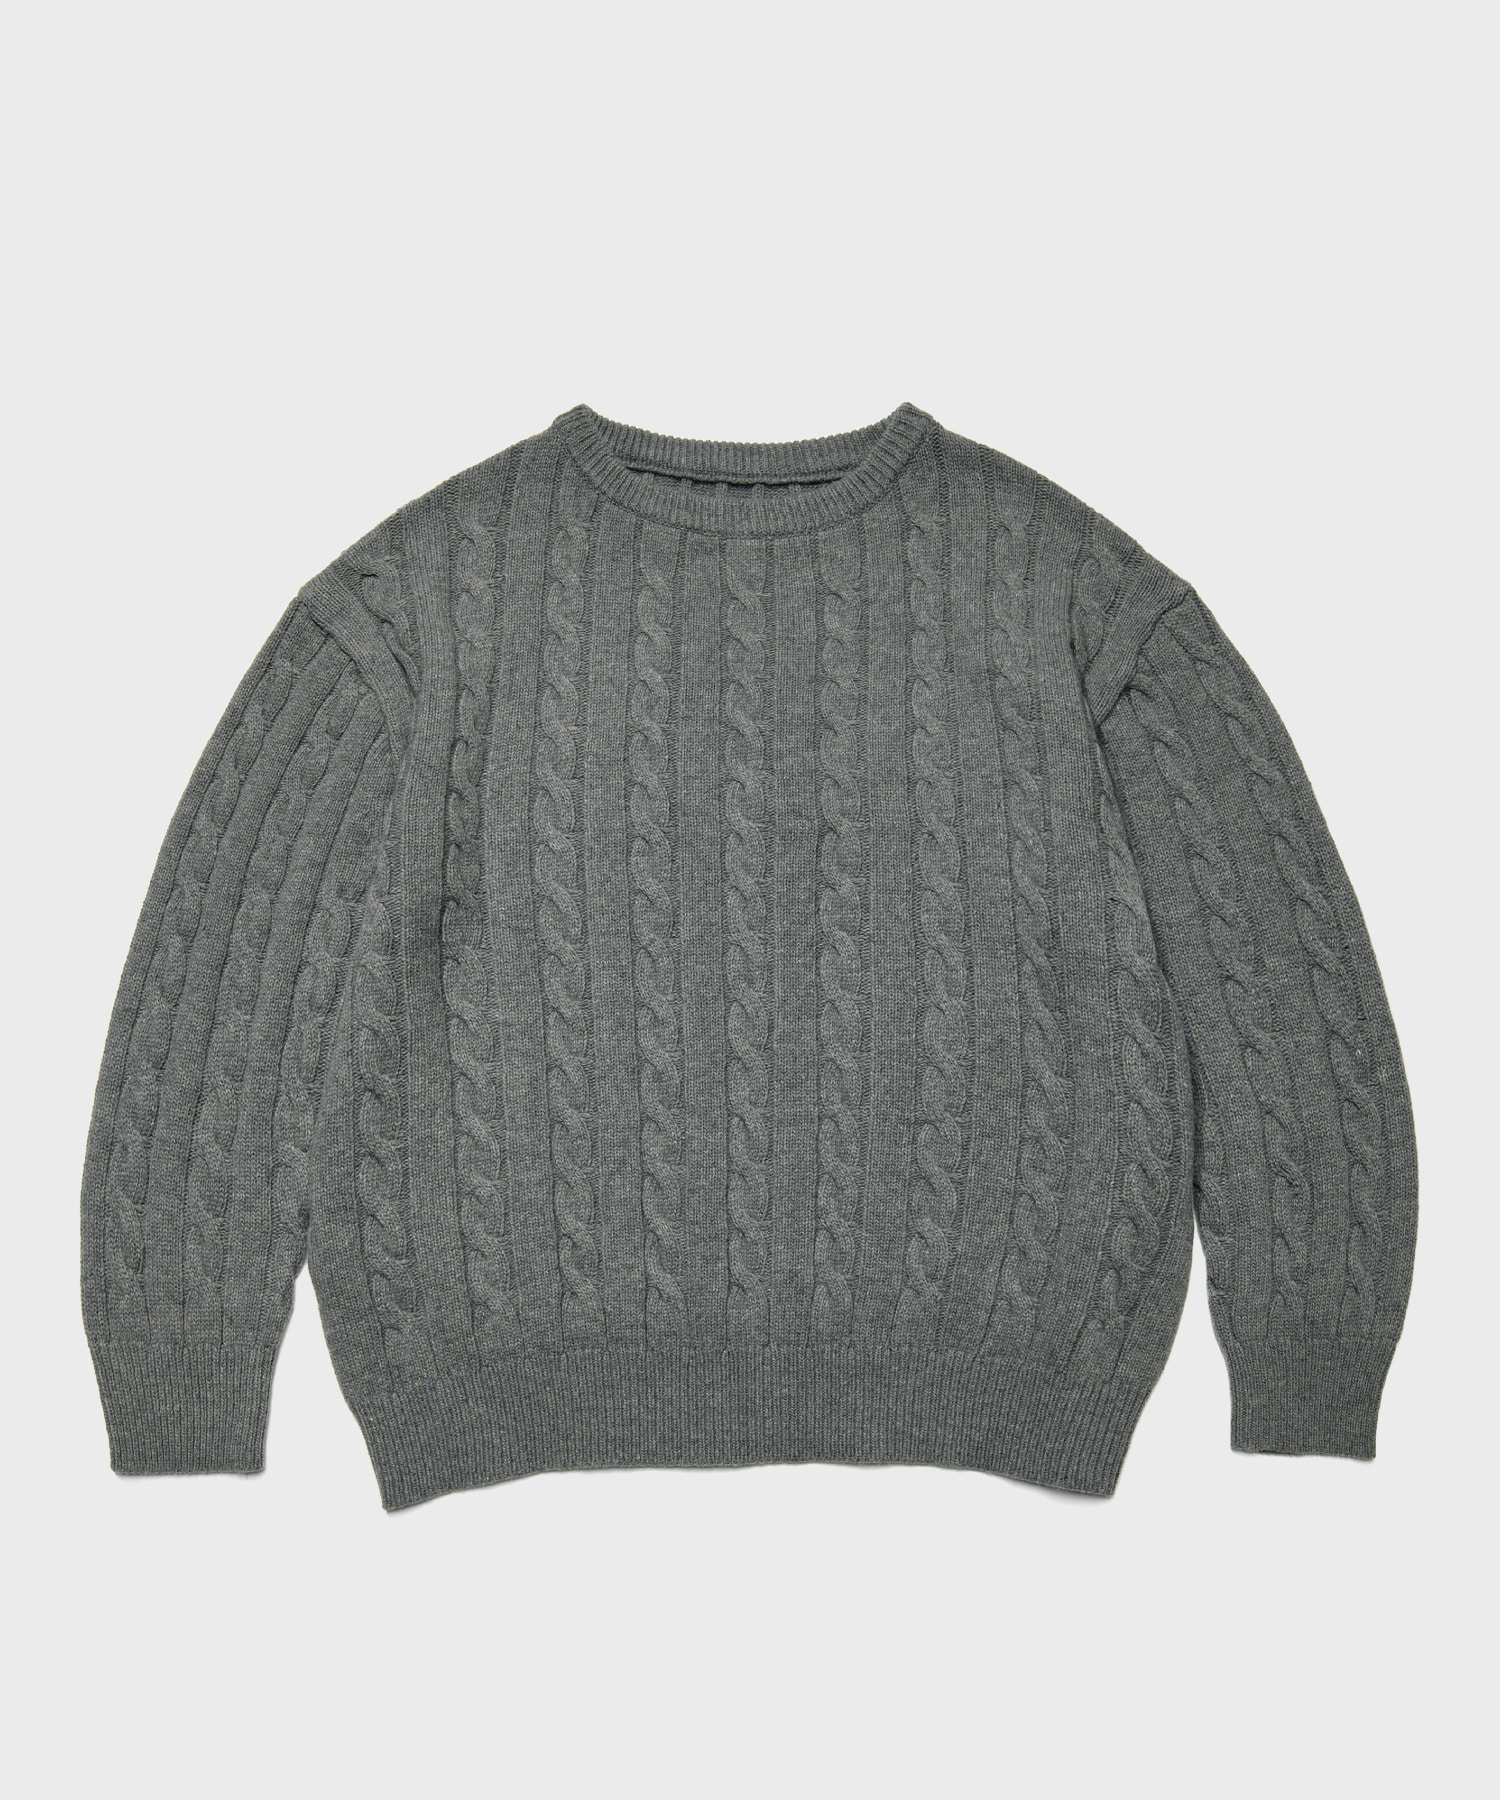 Boatneck cable knit Gray